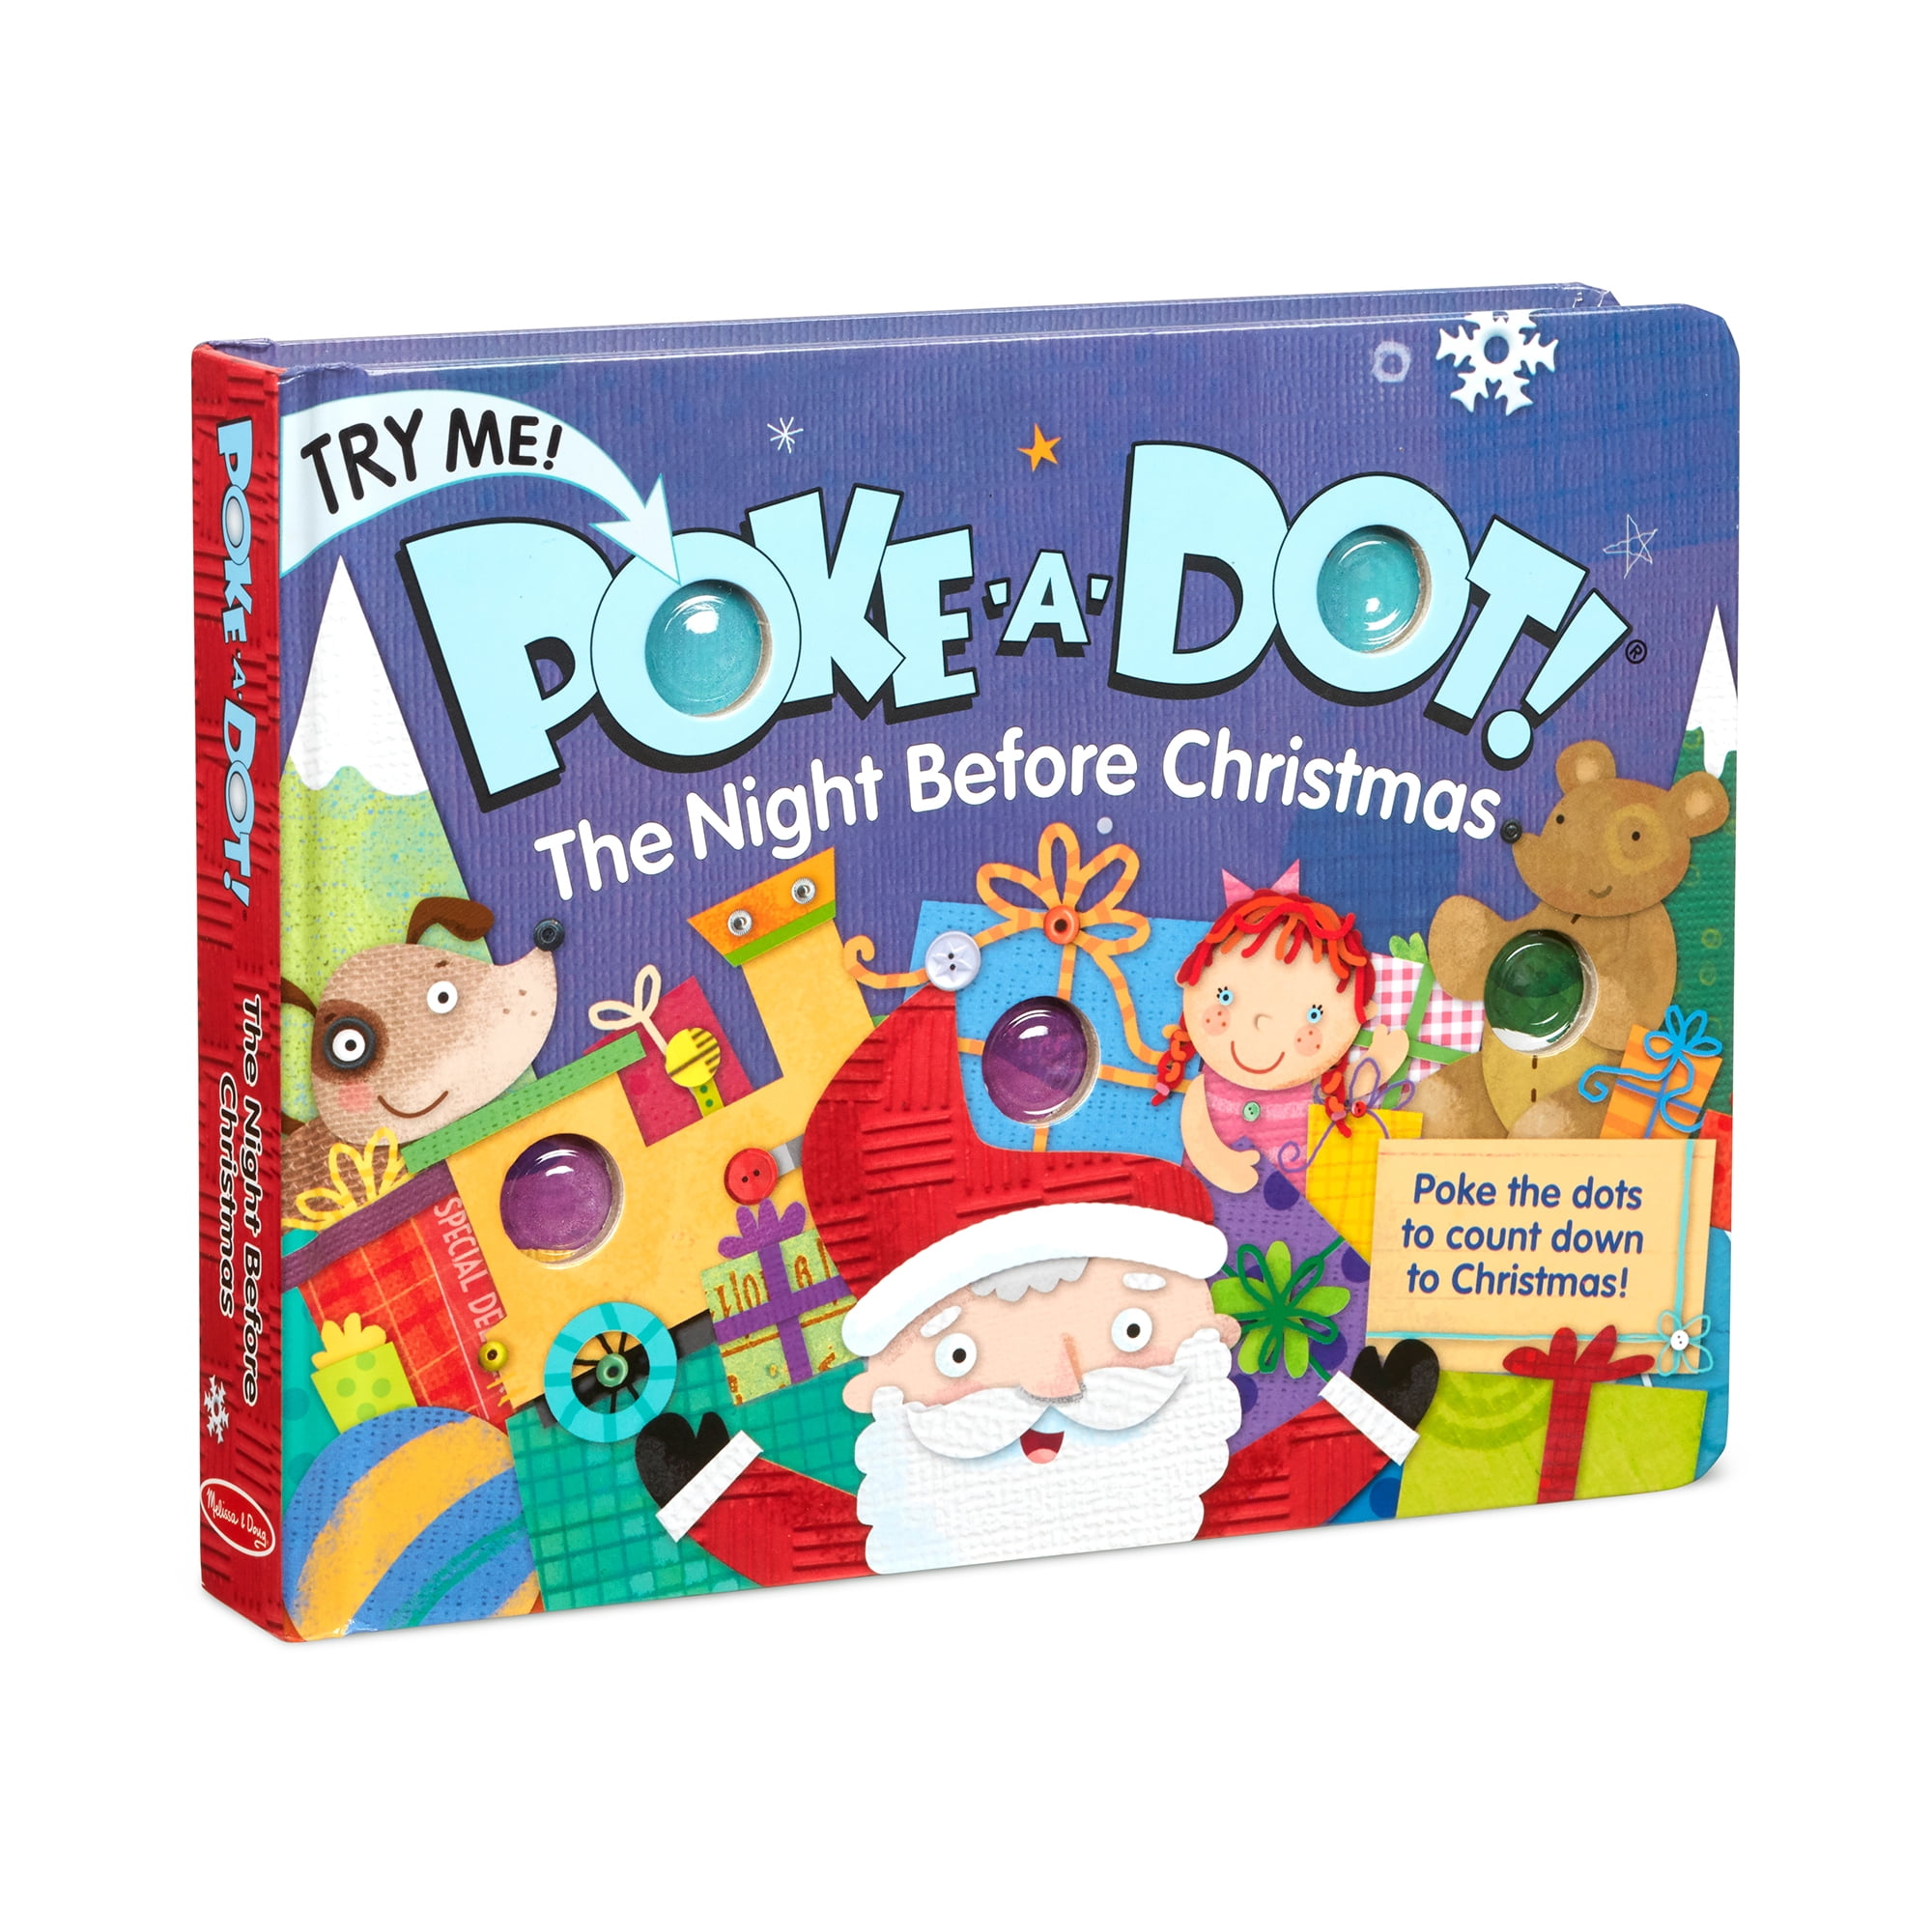 Melissa & Doug Children's Book - Poke-a-Dot:The Night Before Christmas  (Board Book with Buttons to Pop) 